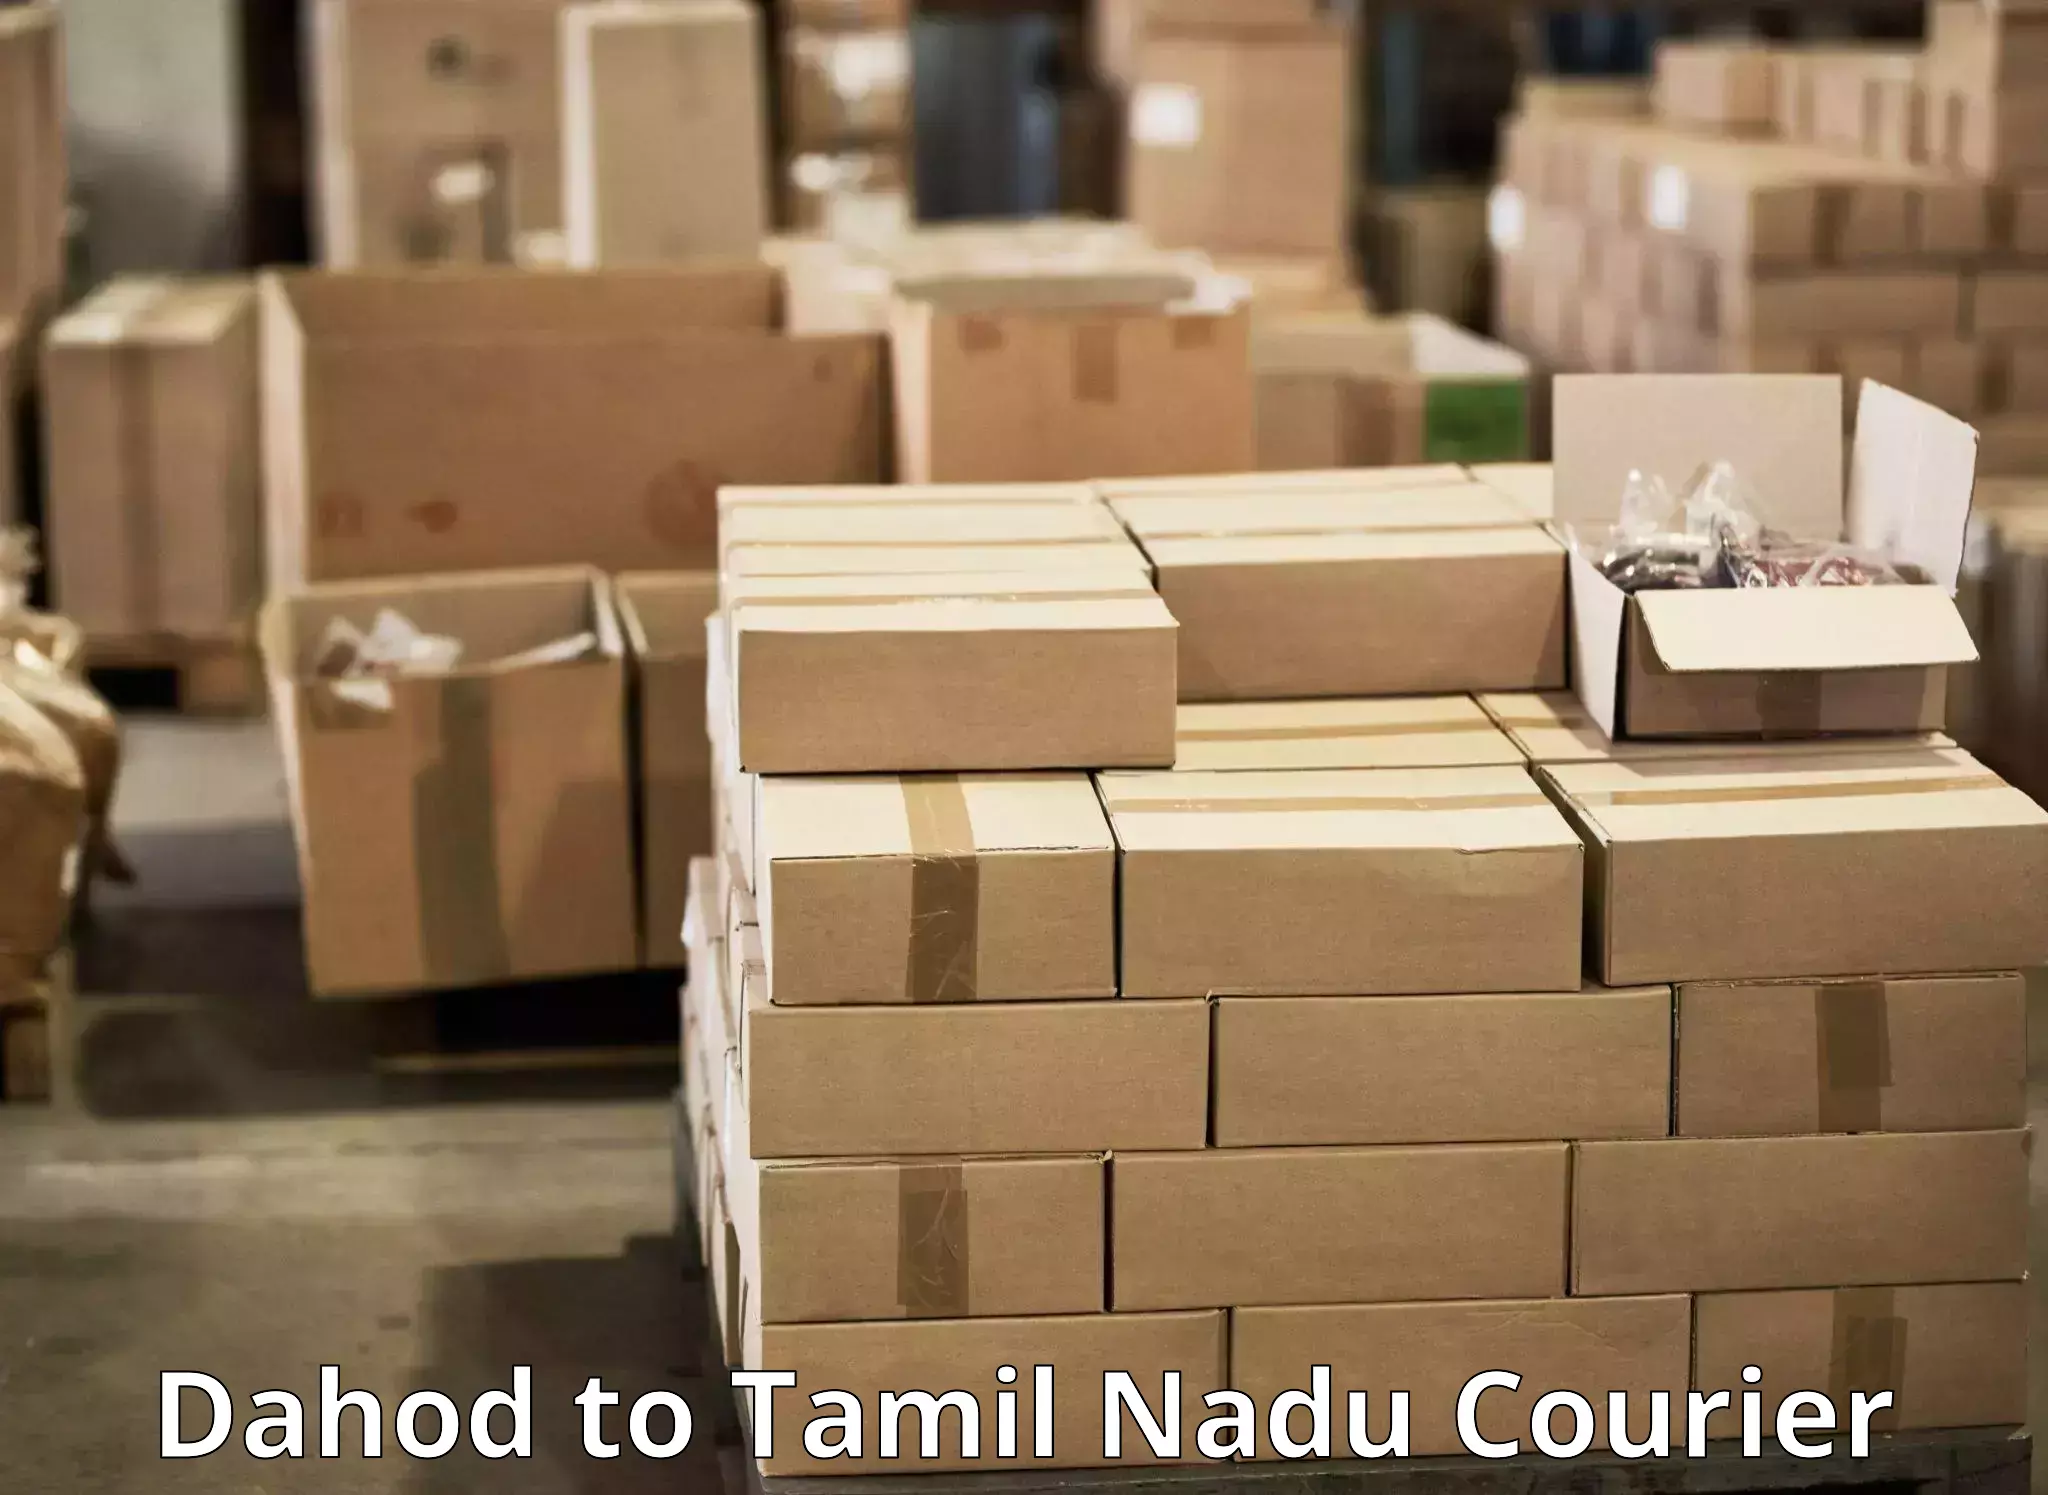 Subscription-based courier Dahod to Tamil Nadu